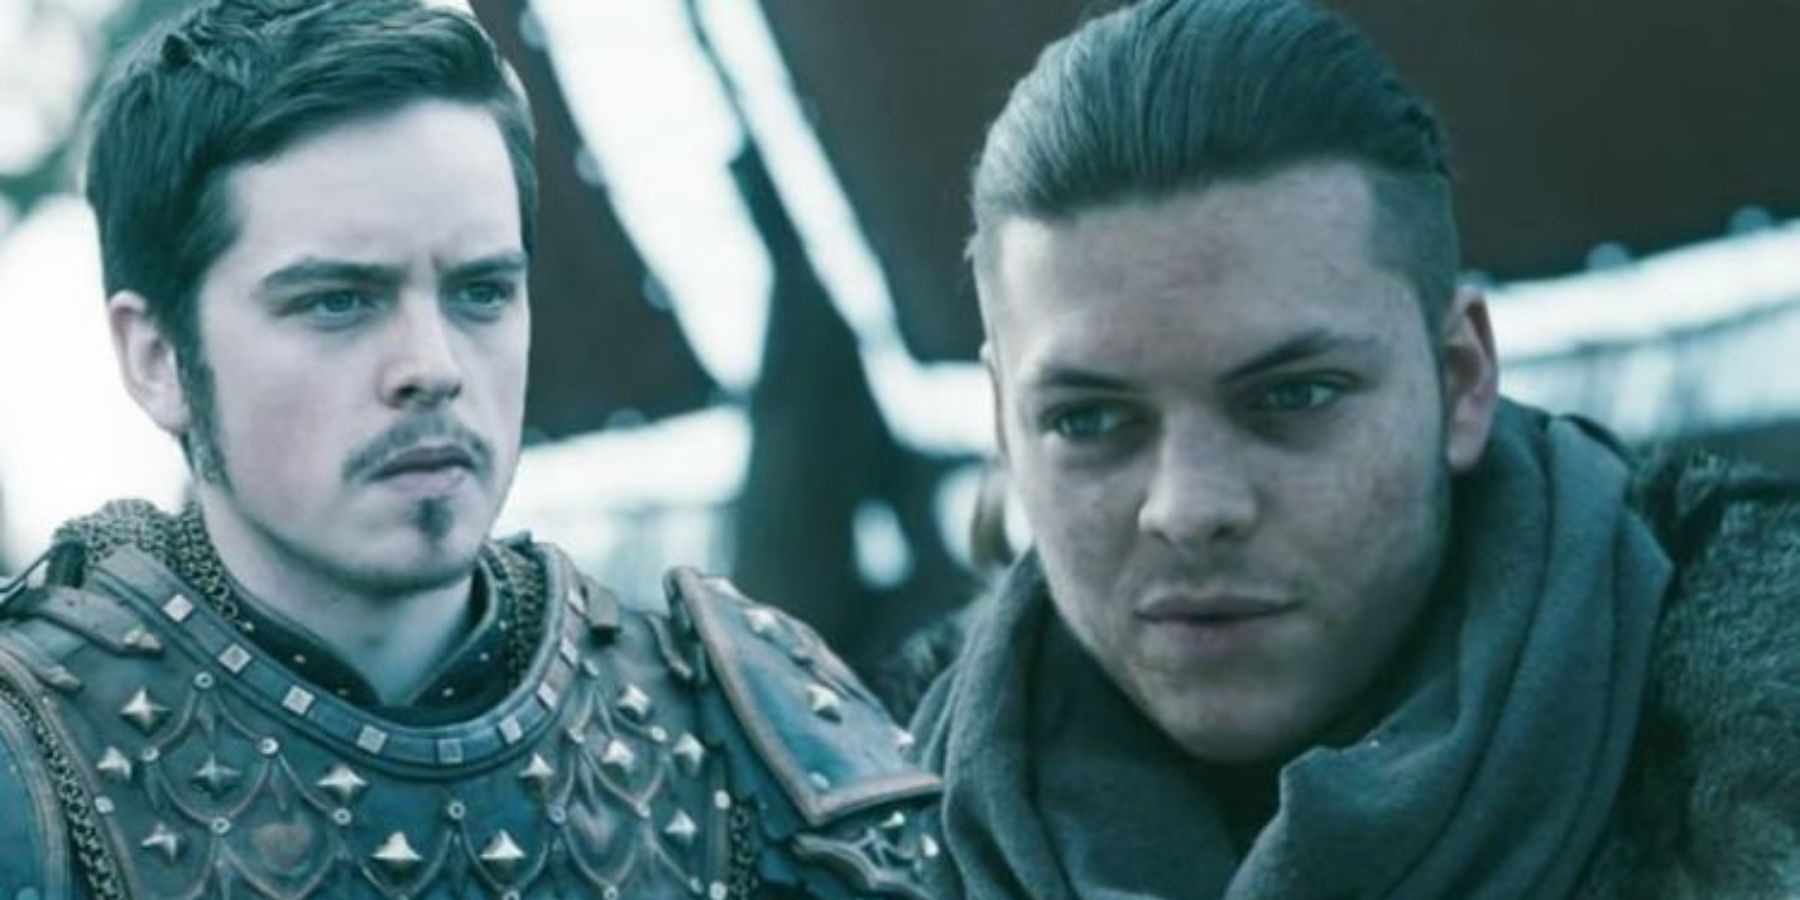 Alfred and Ivar from the Vikings television series.